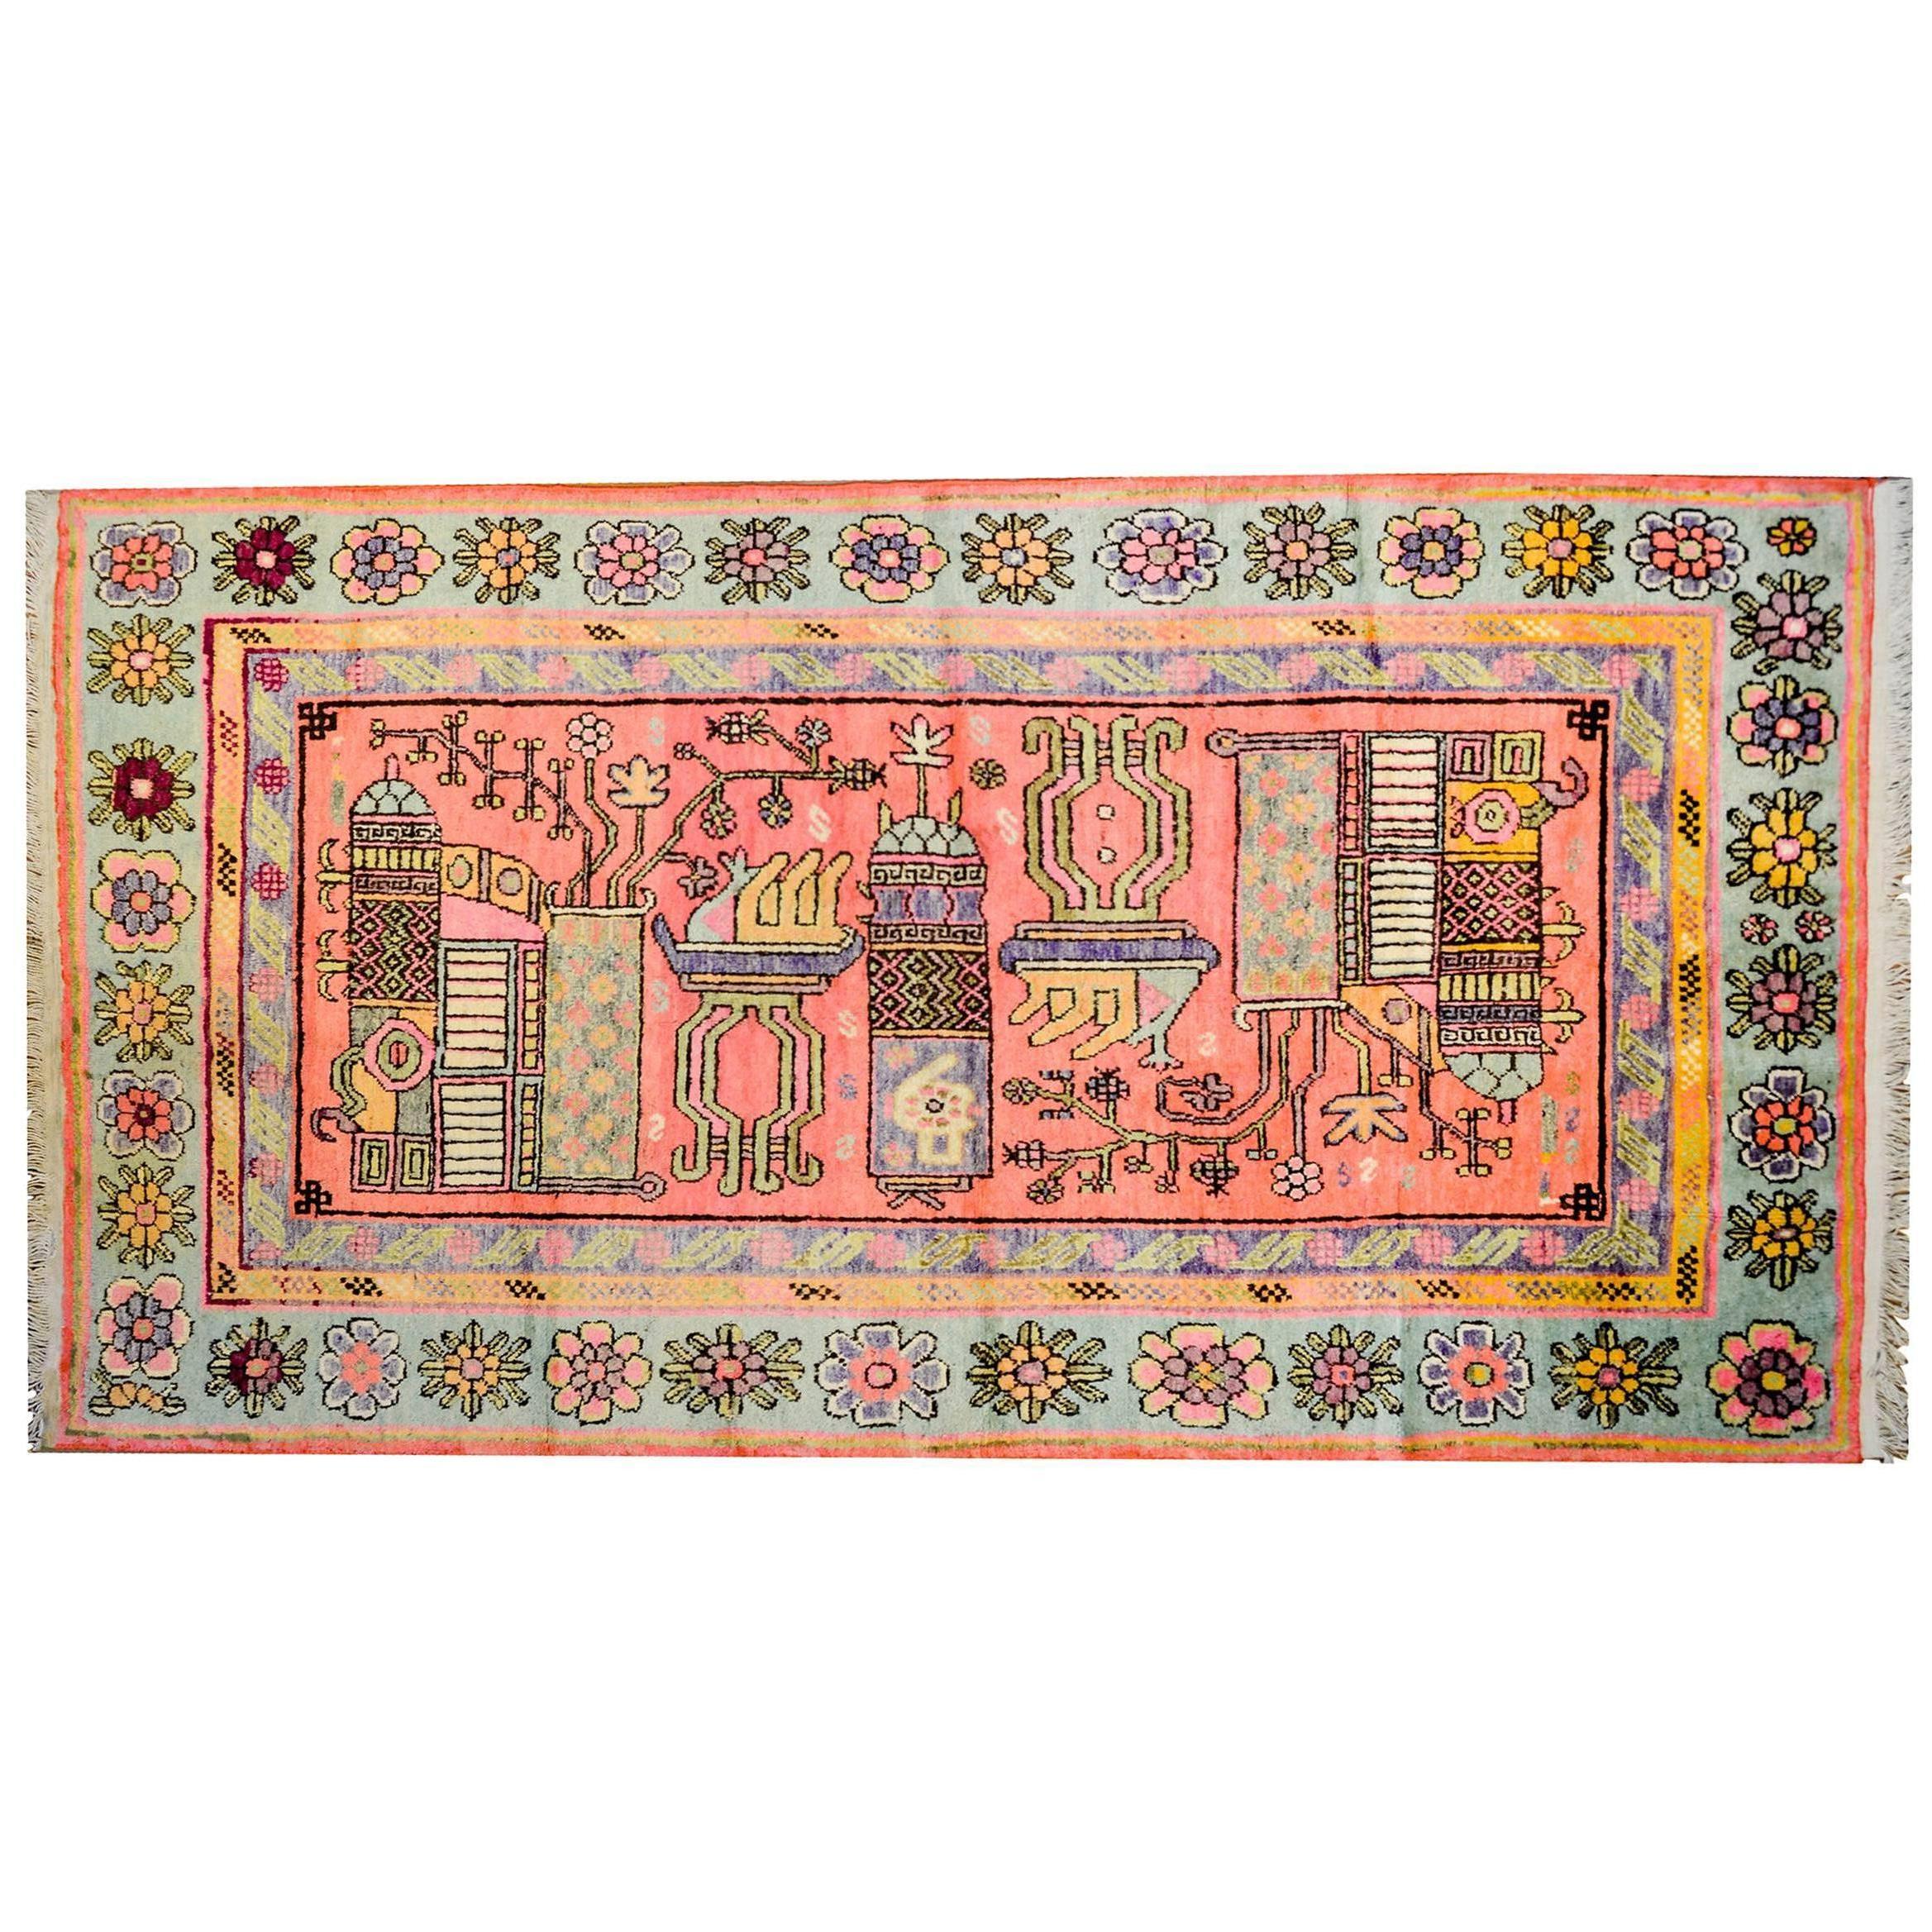 Wonderful Early 20th Century Pictorial Khotan Rug For Sale